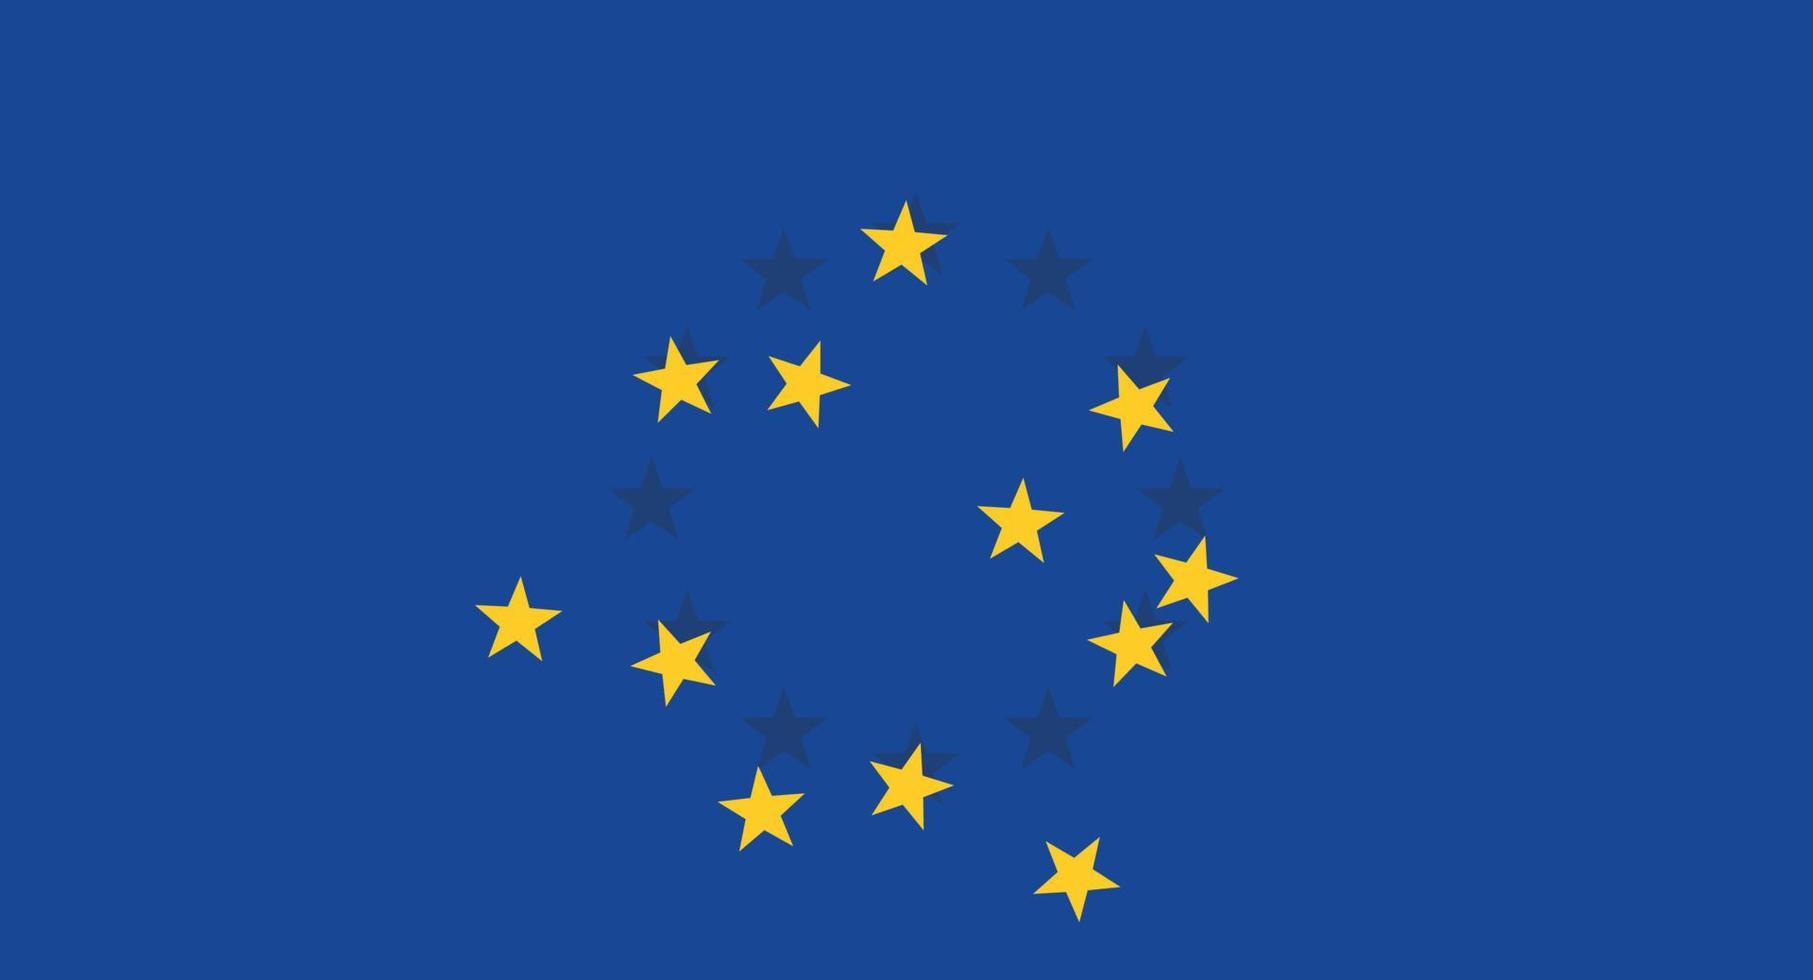 End of the European Union. European Union economy collapse. Symbol of crisis, recession, downfall and stock market crash. vector